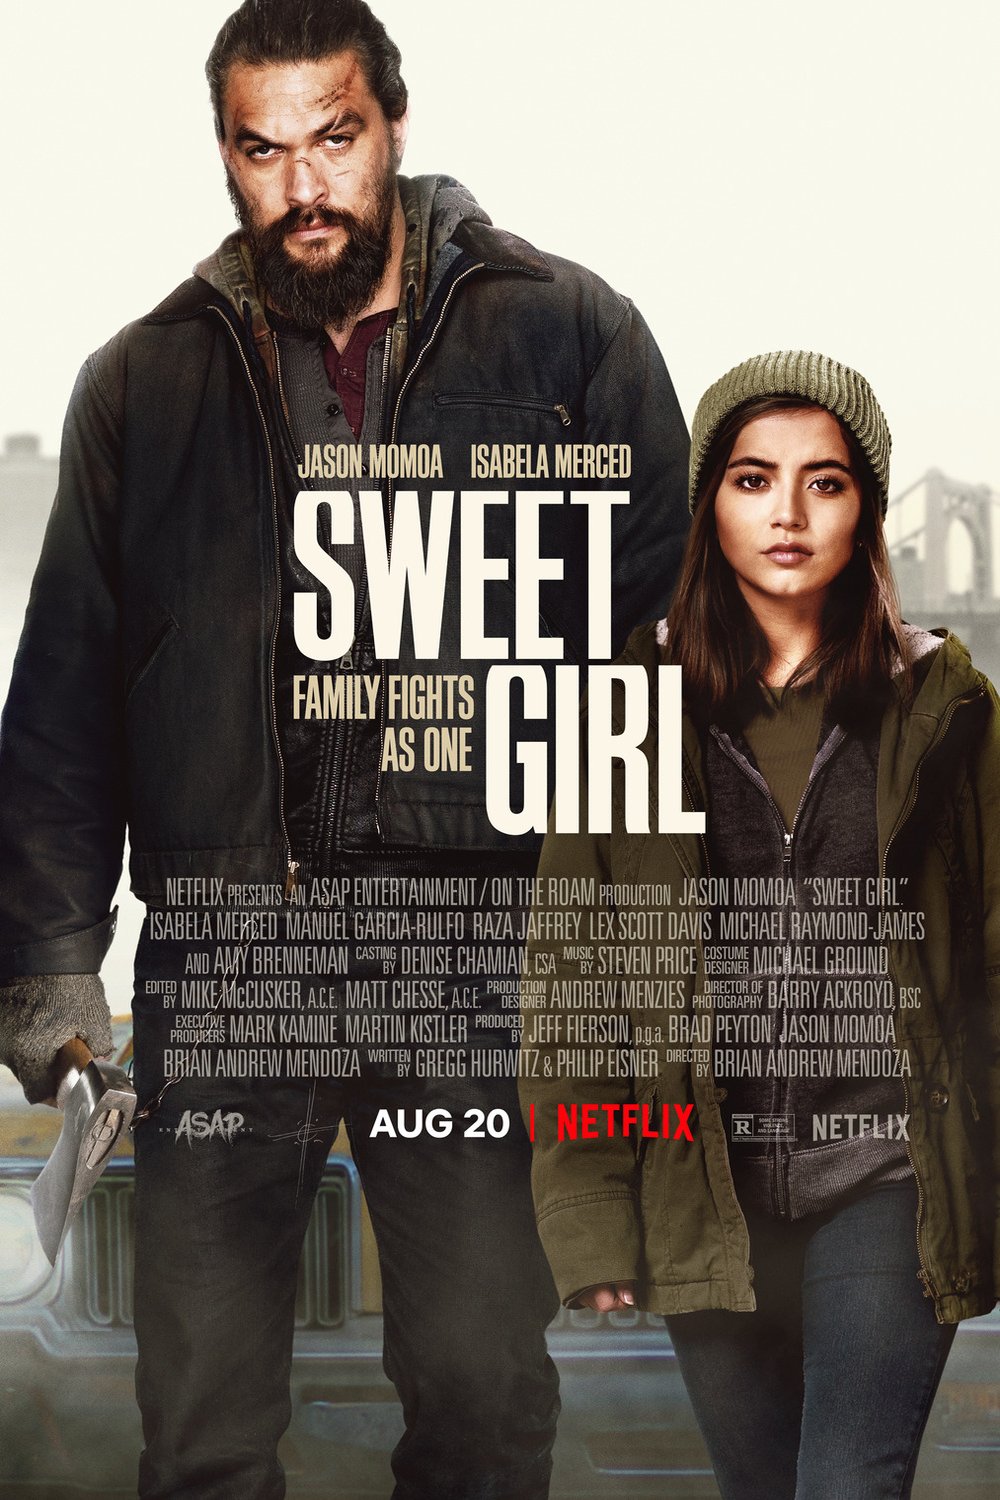 Poster of the movie Sweet Girl